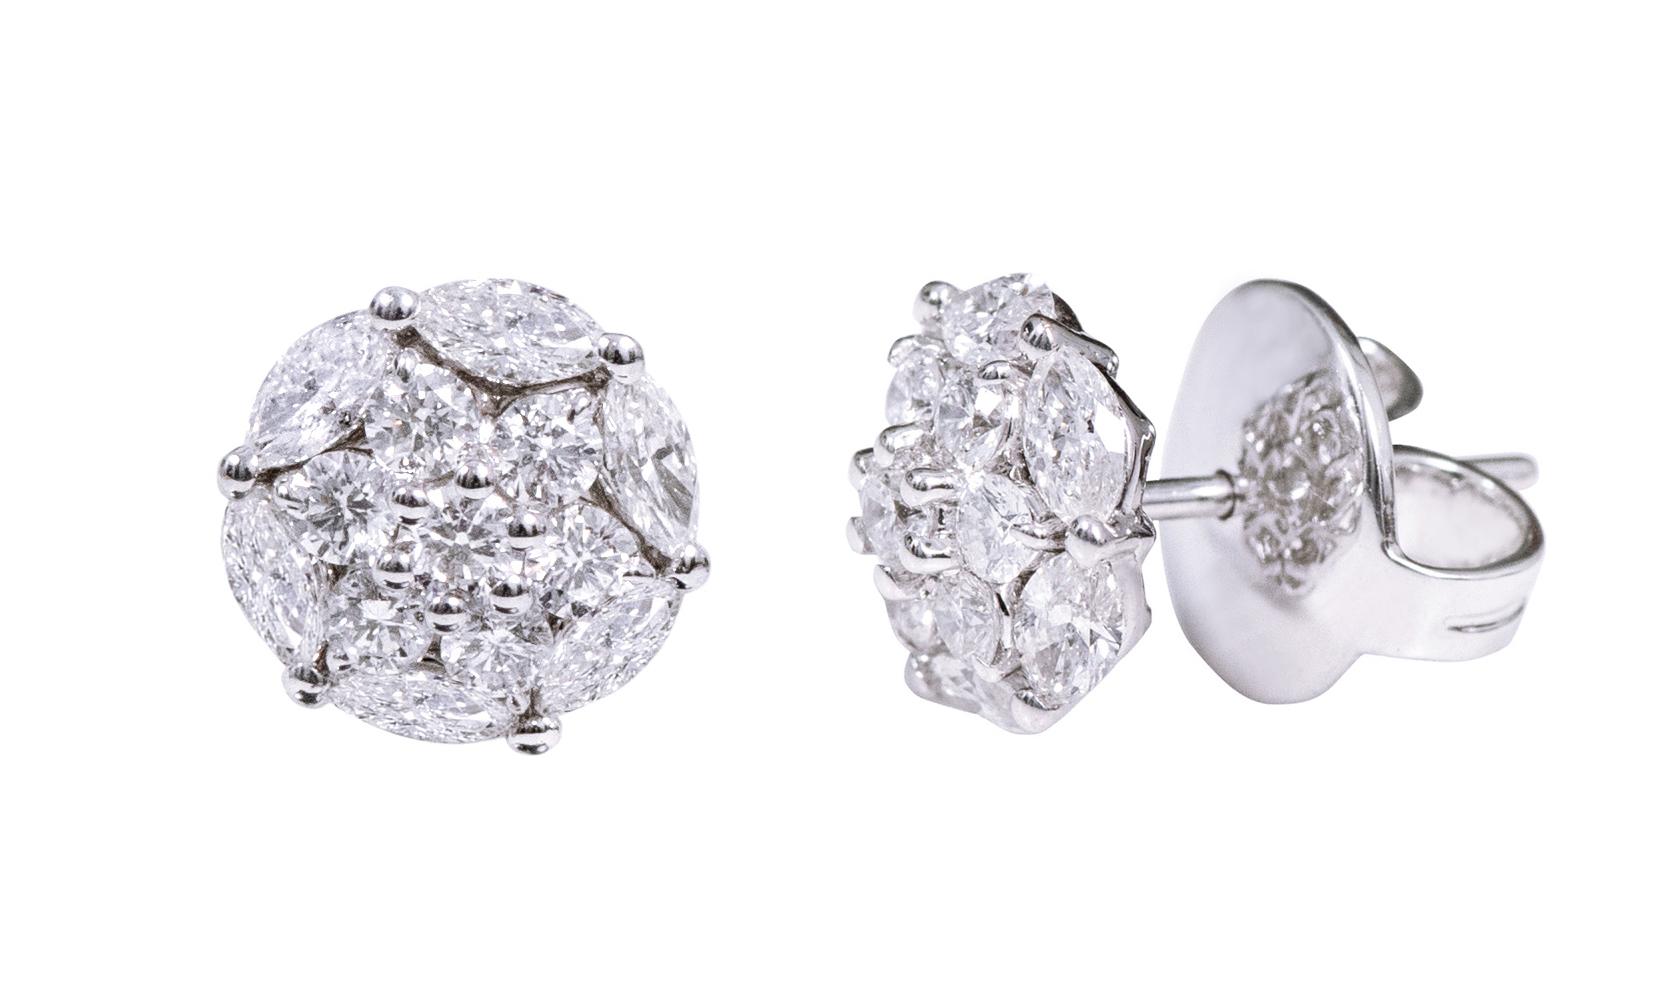 18 Karat White Gold 1.46 Carat Diamond Stud Earrings

This spectacular diamond sunflower modulation stud earring is exquisite. The design is magnificently created in various levels to fire up the sun/chakra with the combination of solitaire full-cut